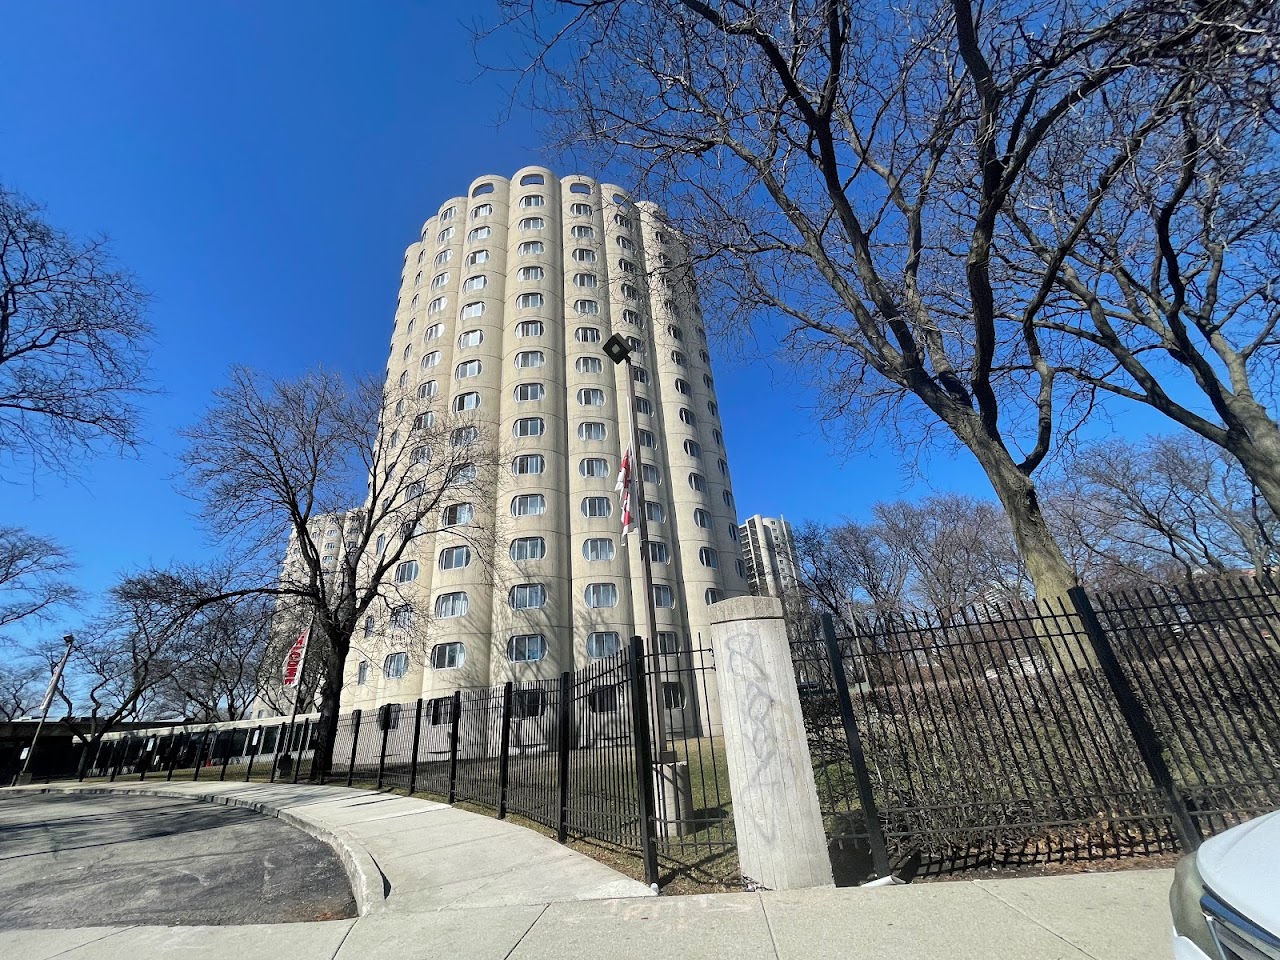 Photo of HILLIARD HOMES I. Affordable housing located at 2111 S CLARK ST CHICAGO, IL 60616